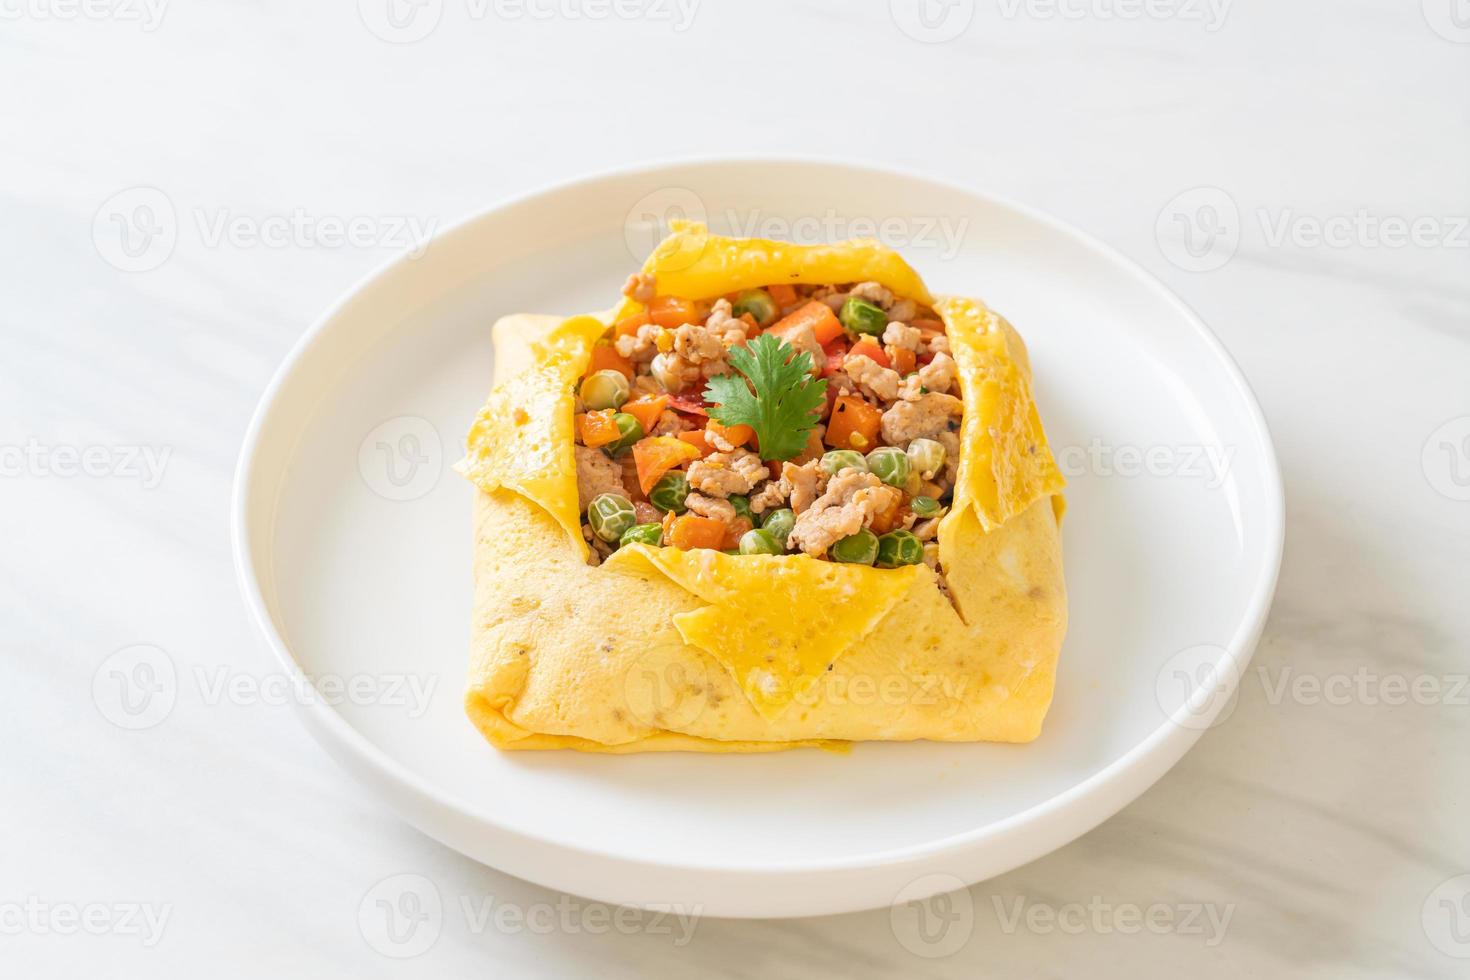 Egg wrap or stuffed egg with minced pork, carrot, tomato, and green peas photo